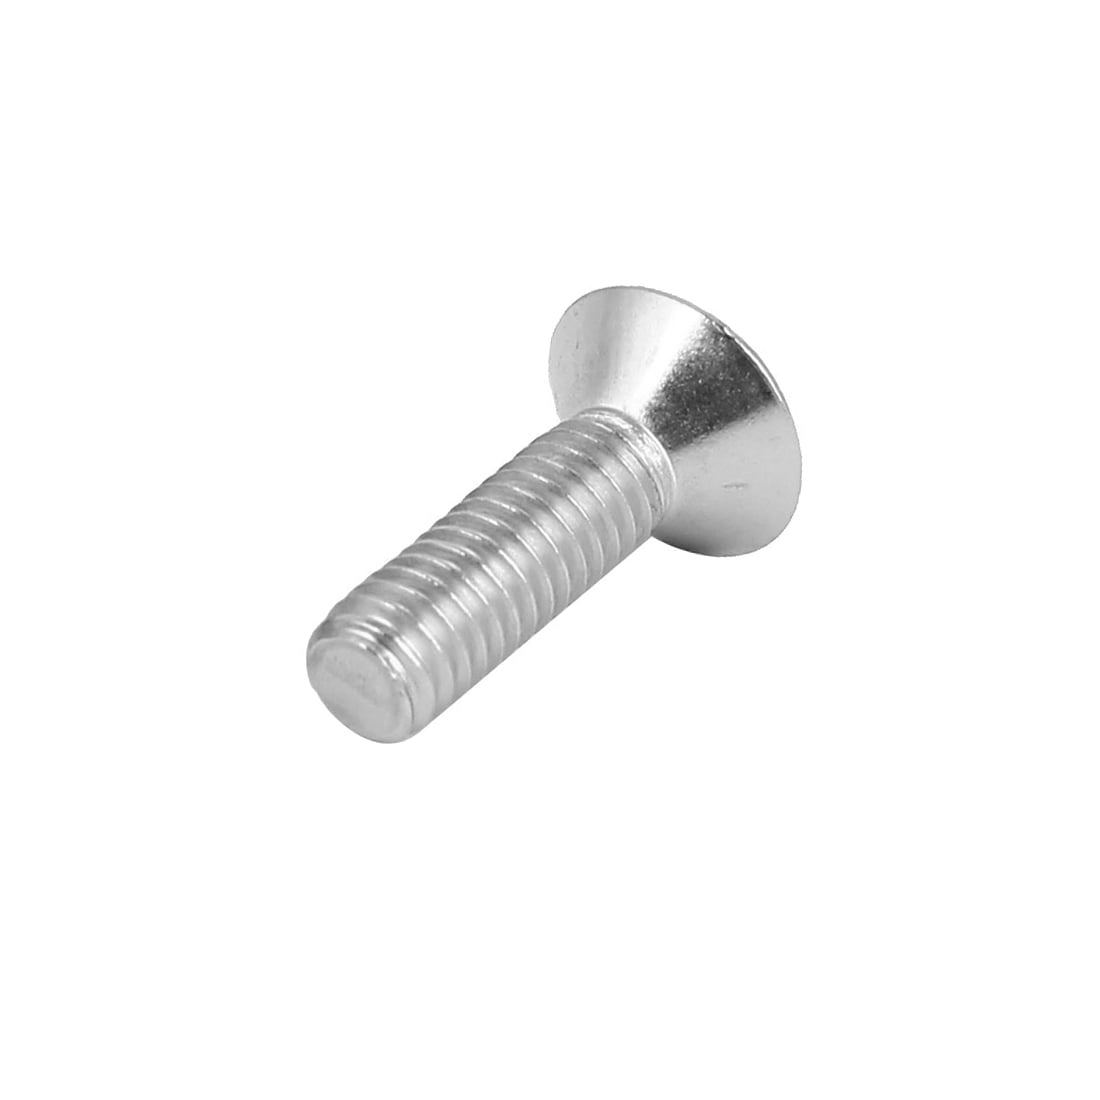 uxcell M4x14mm 316 Stainless Steel Phillips Pan Head Machine Screws Silver Tone 40 Pcs SYNCTEA026069